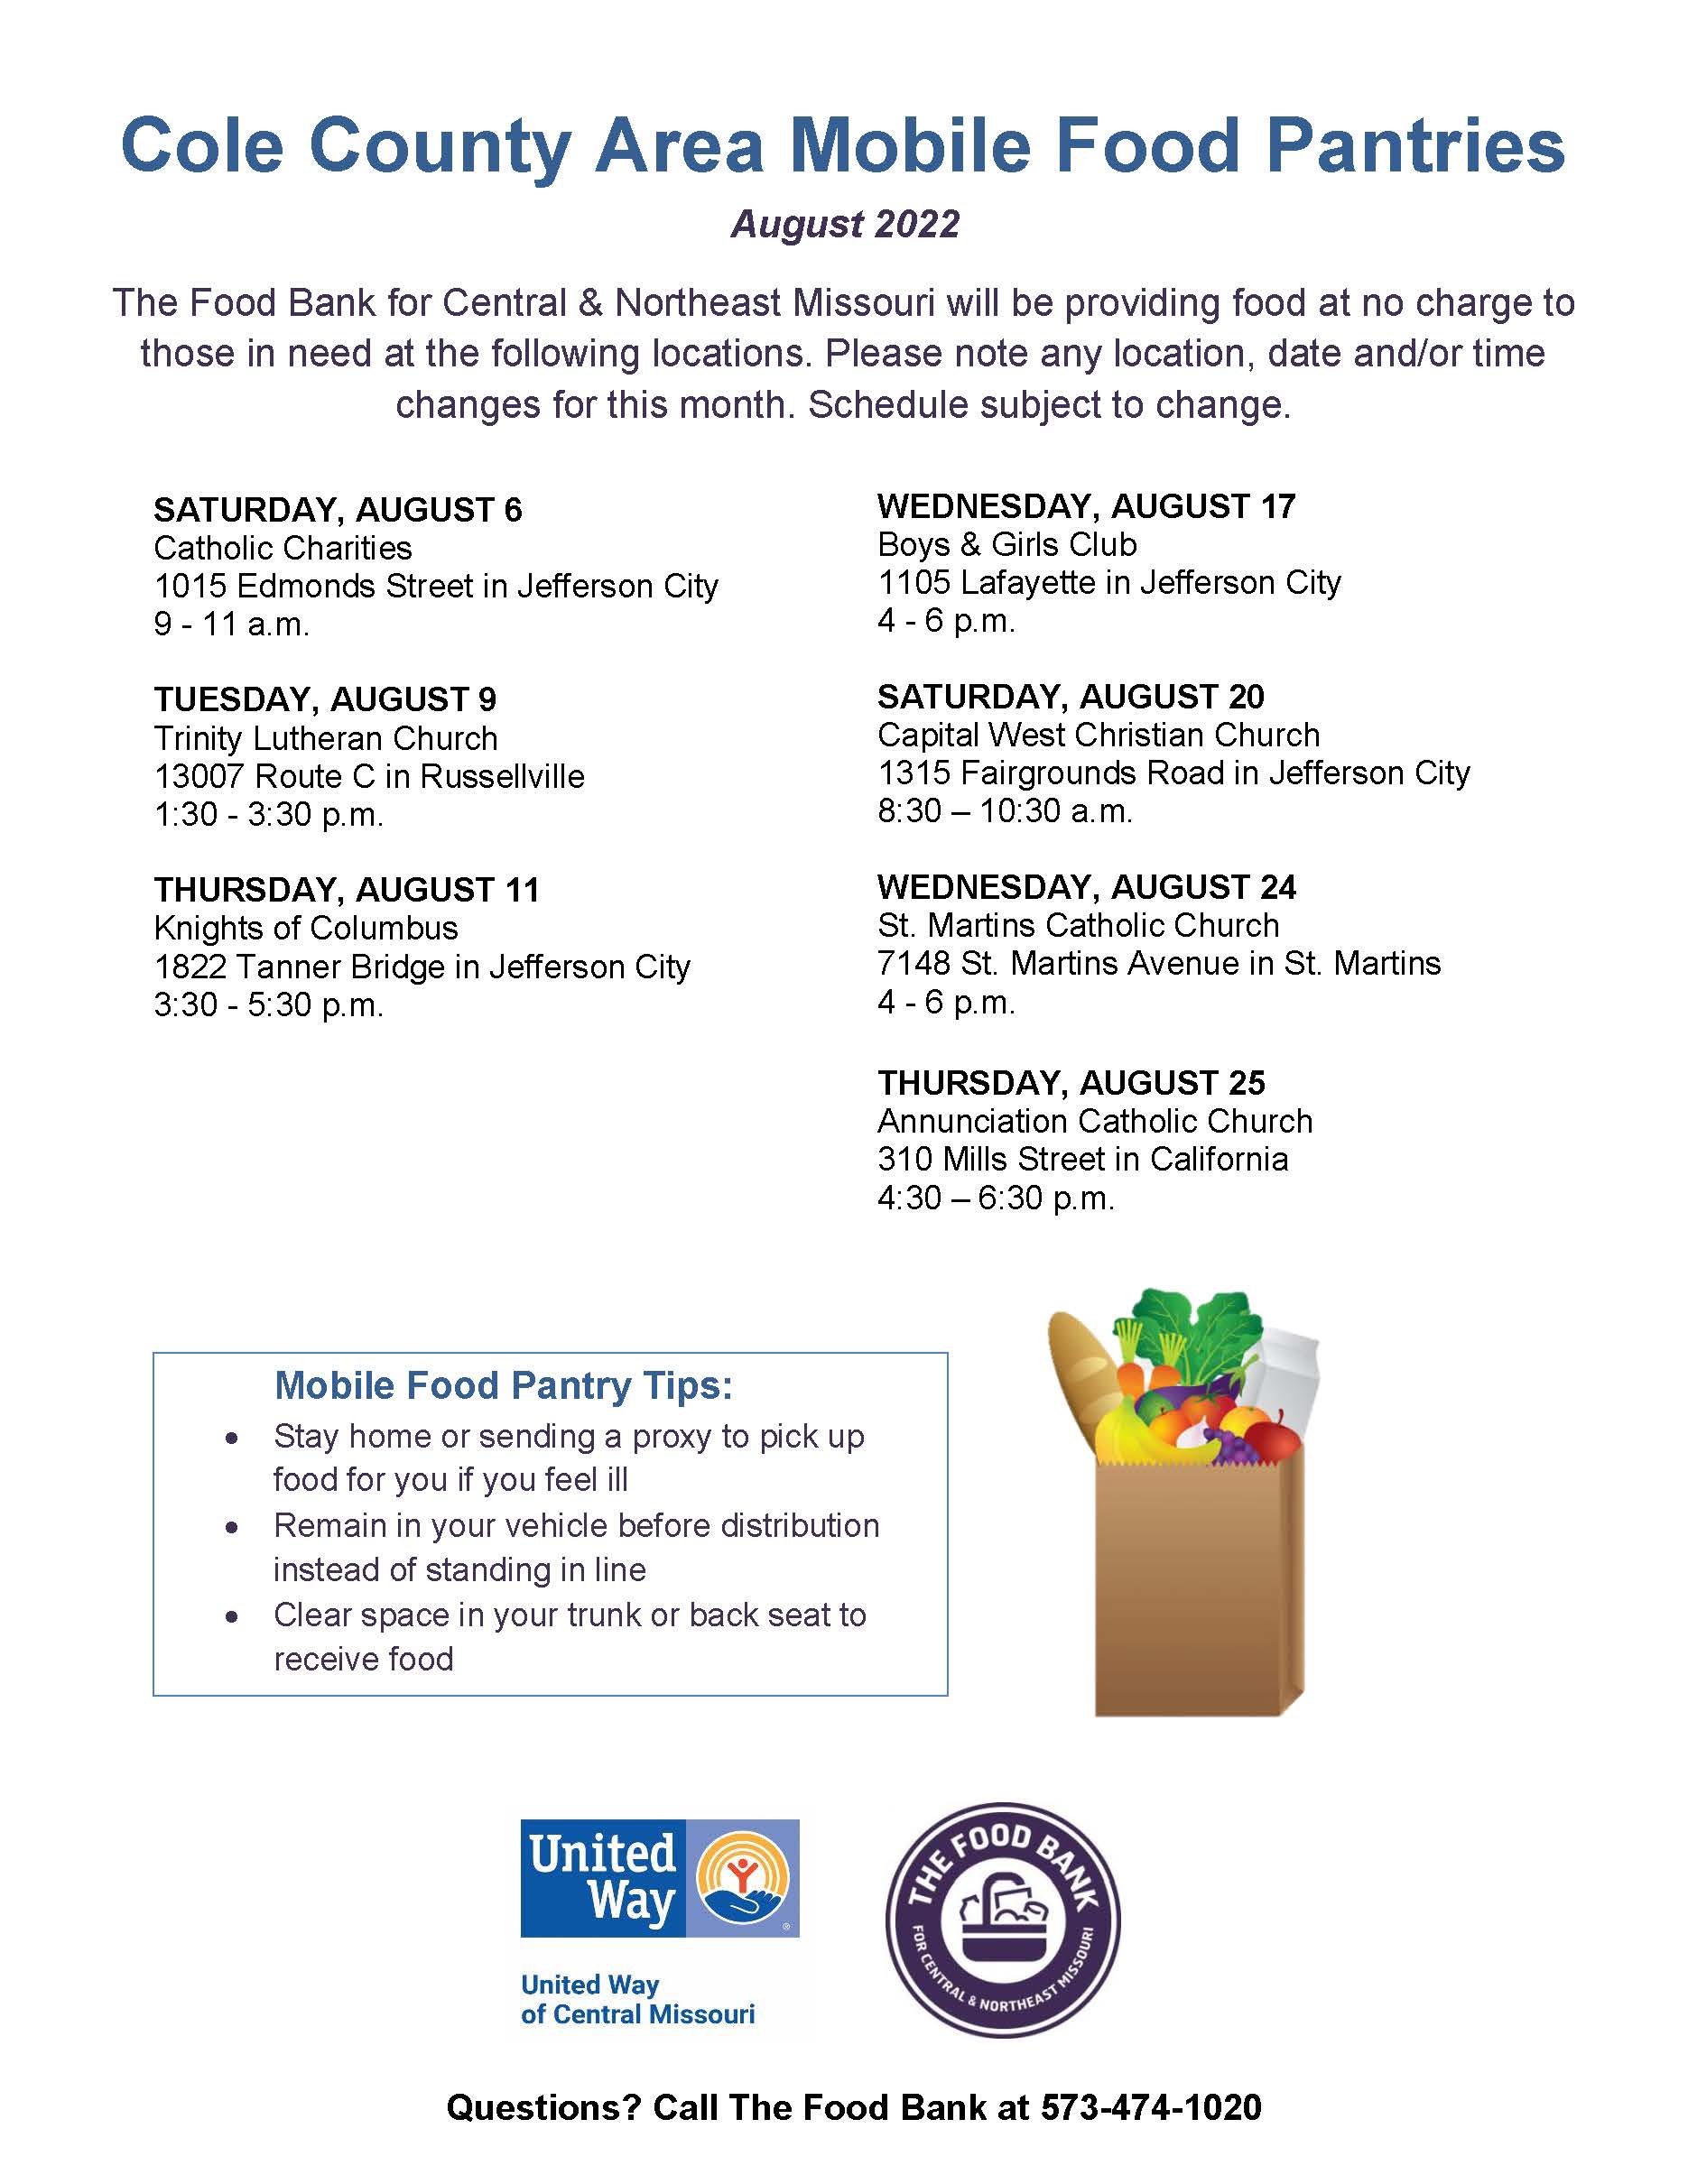 Mobile Food Pantry @ Boys & Girls Club from 4 - 6 pm